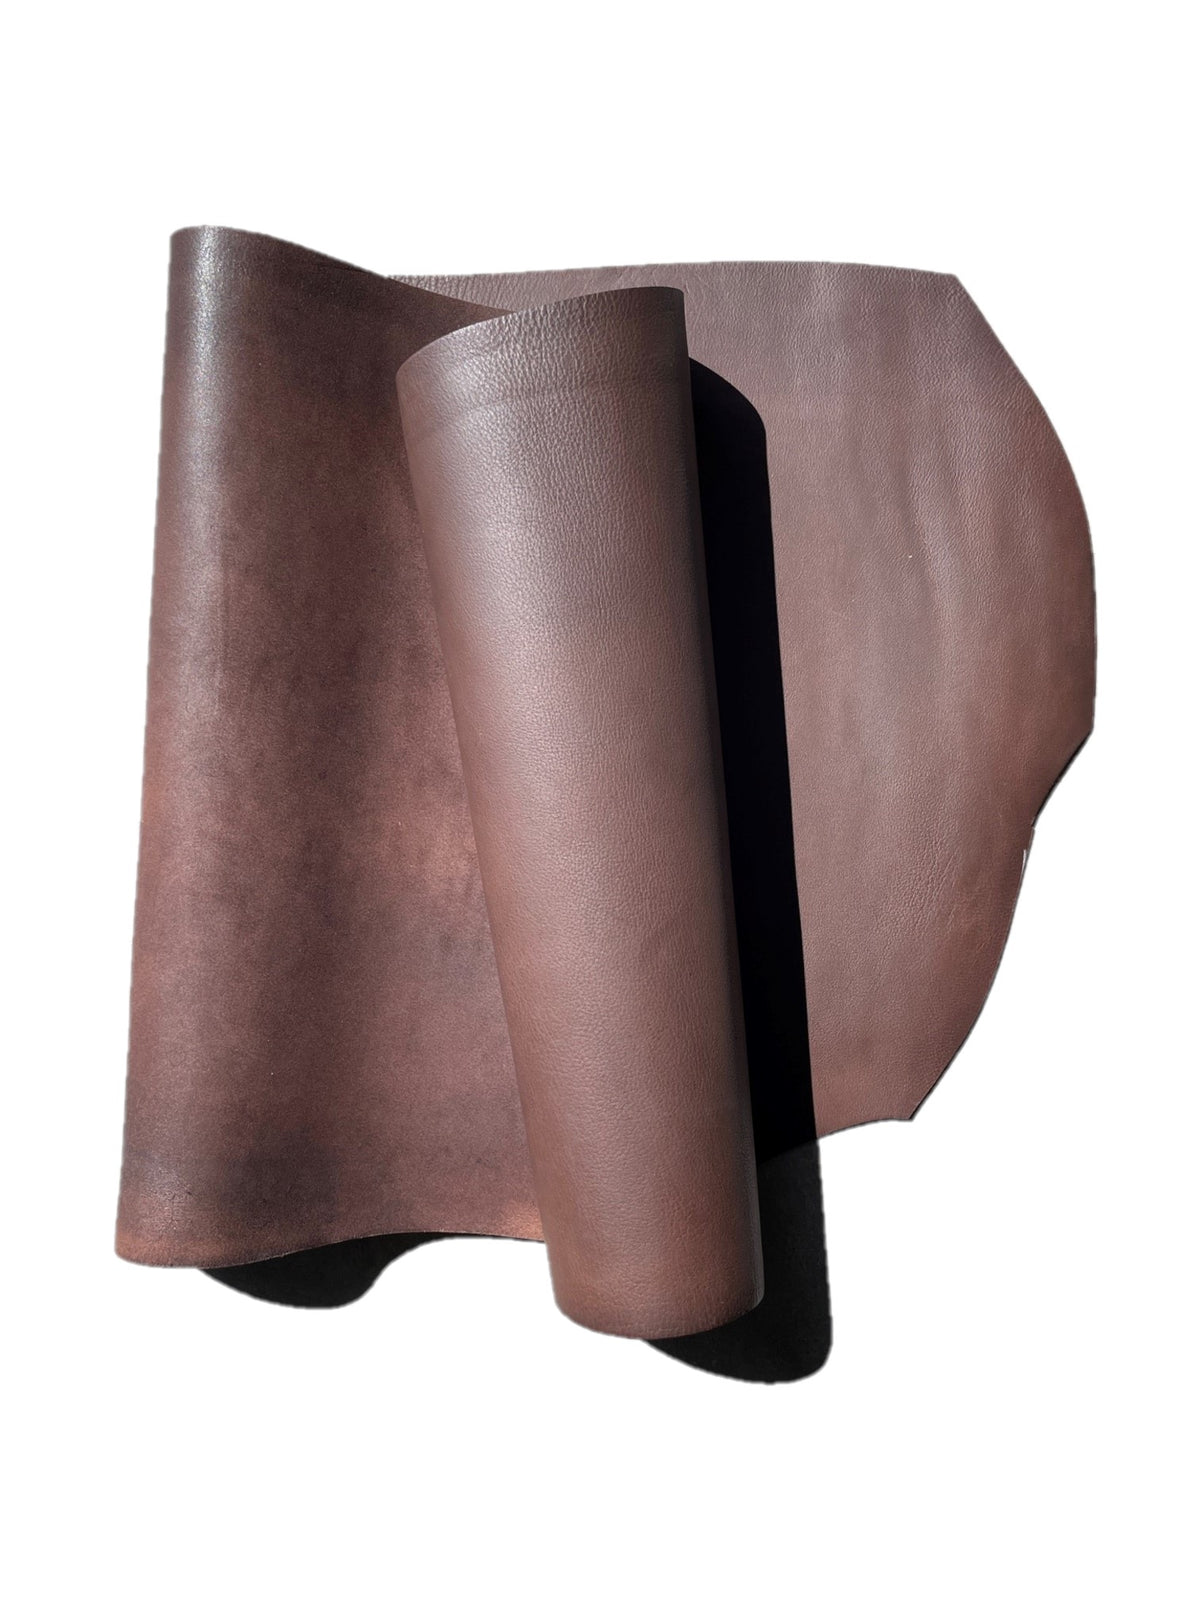 Wild West Buffalo Belting | Brown | 3.8 mm | 8 sq.ft From $115 ea.